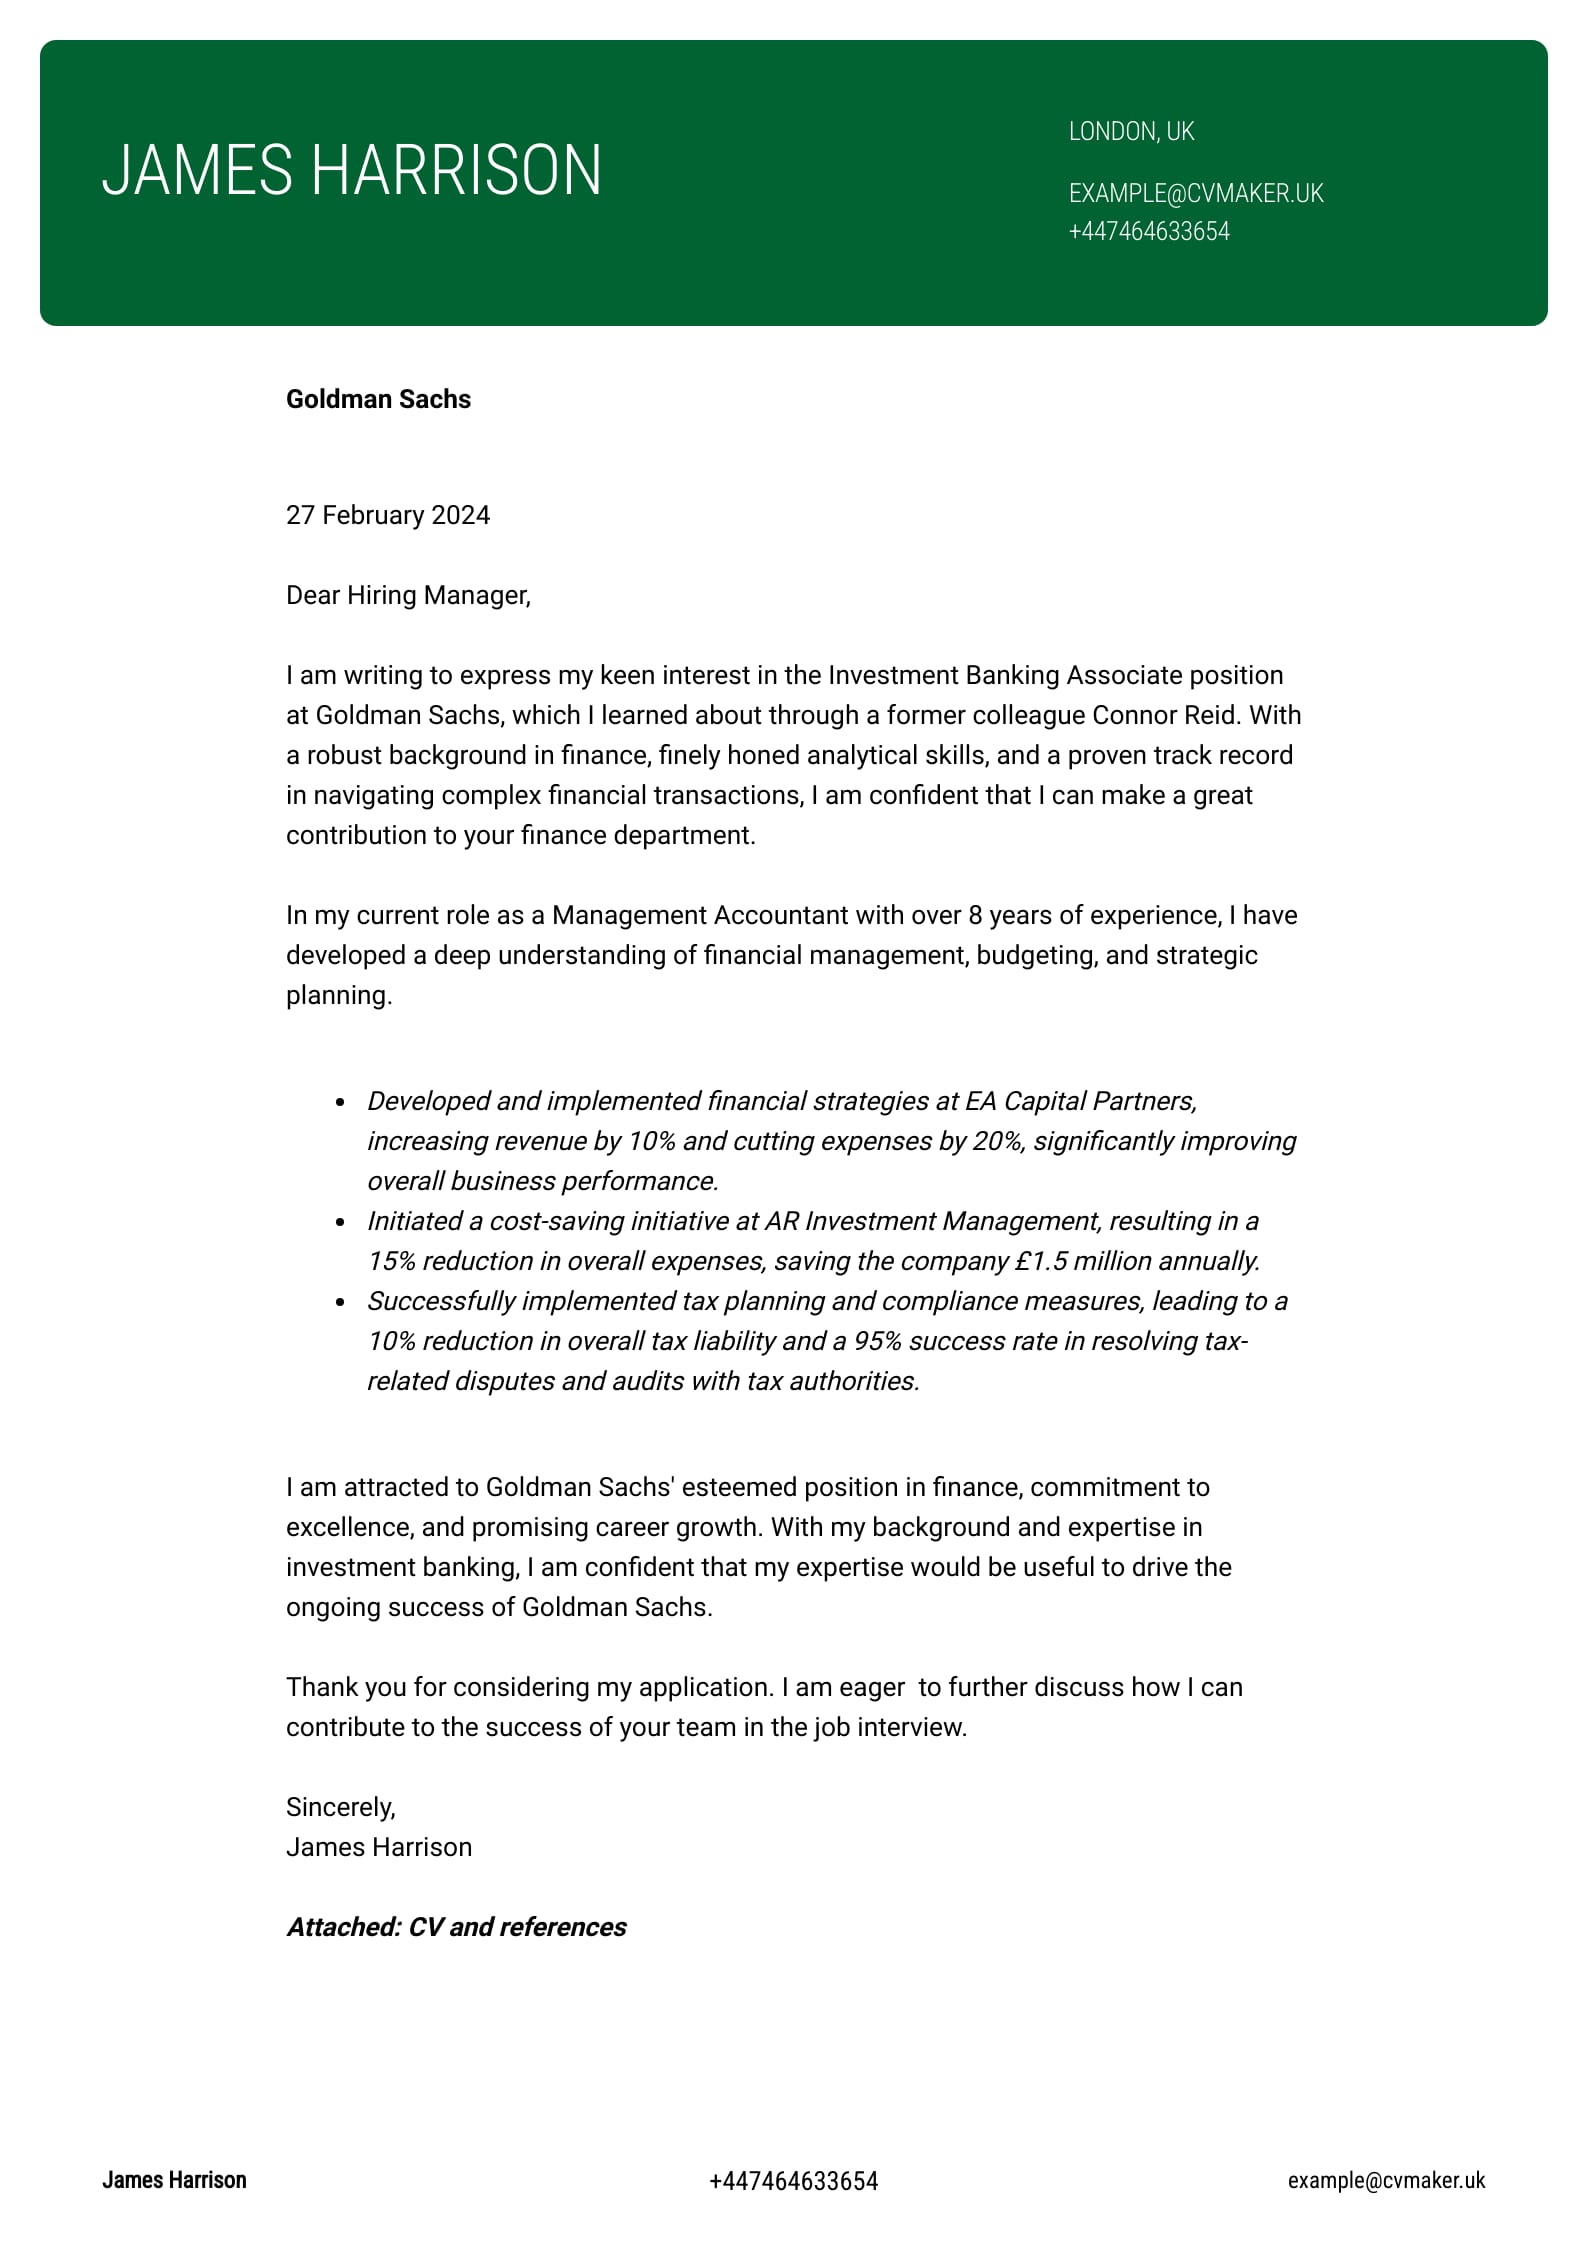 Cover Letter example - Investment Banking - Cornell template